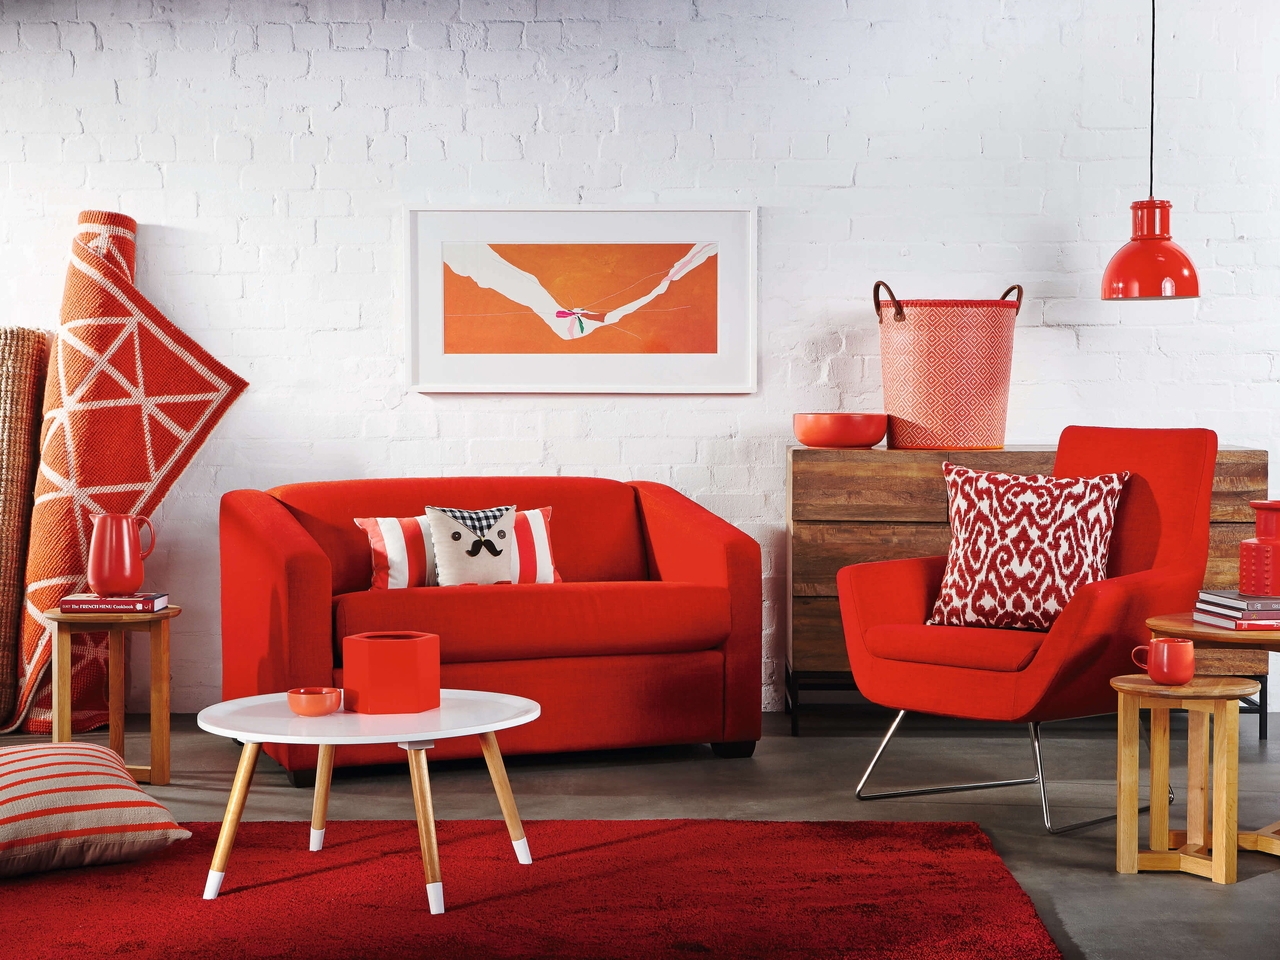 Image: Decor, room, red, color, interior, sofa, chair, pillow, picture, carpet, wall, brick